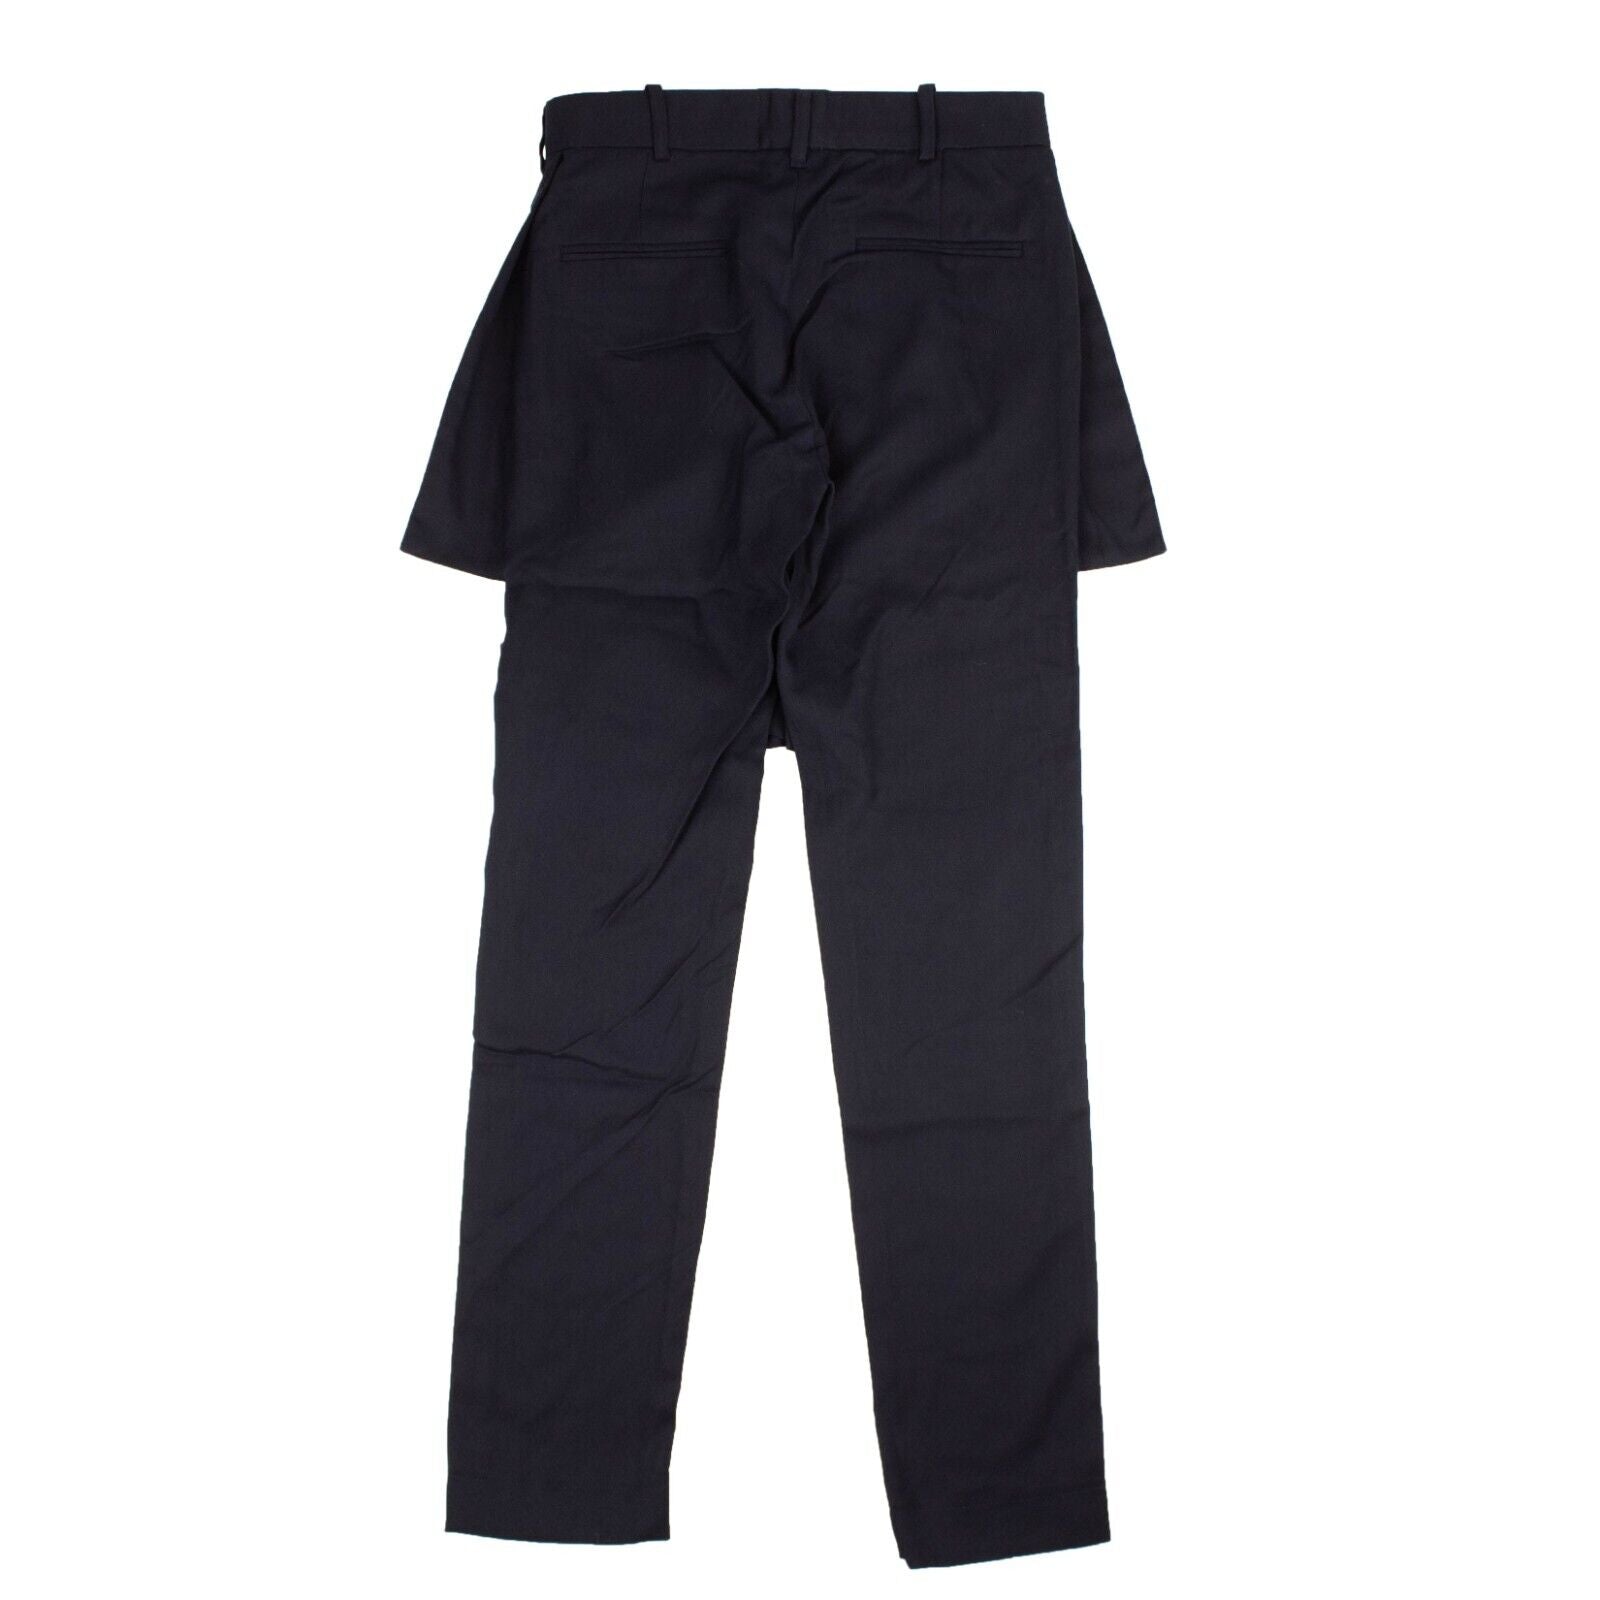 Who Decides War Retroversion Trousers - Navy